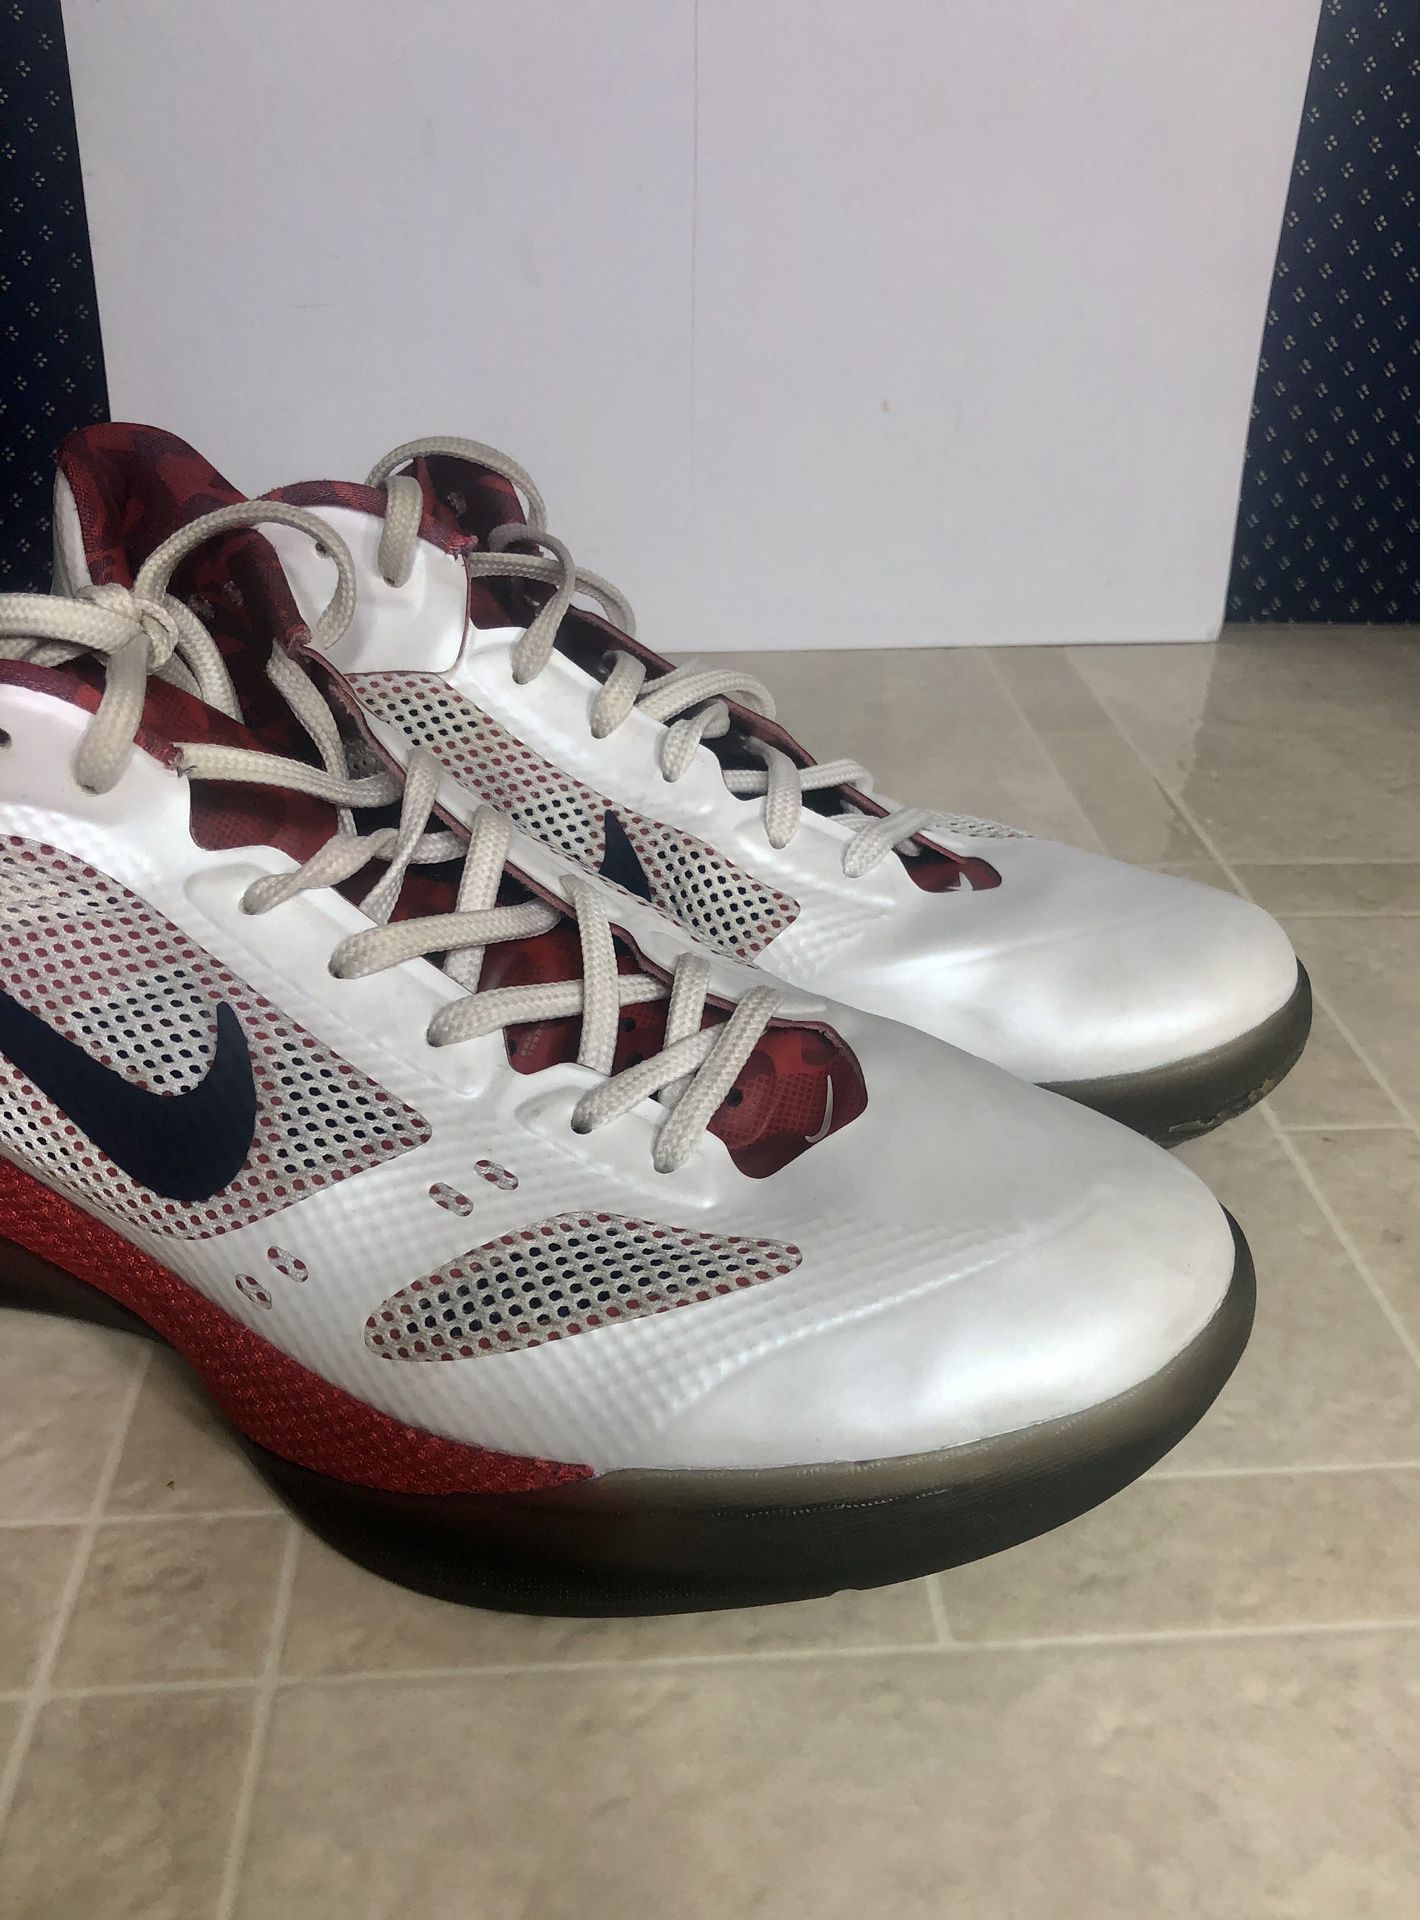 Nike hyperfuse low Deron Williams PE sz 11 for Sale in Indianapolis, IN -  OfferUp